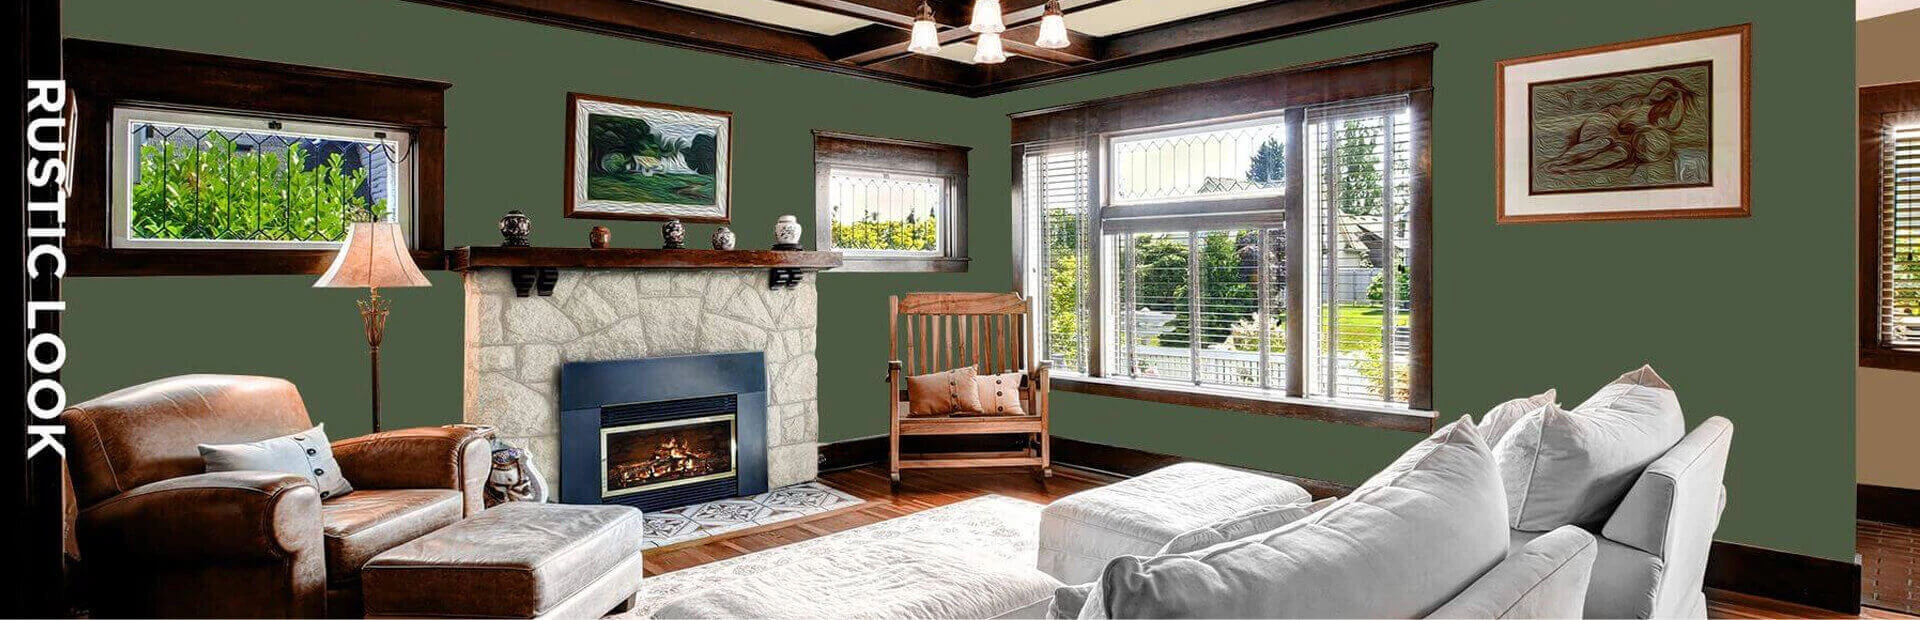 Rustic style living room in tan, forest green and brown featuring furniture and paintings on walls.